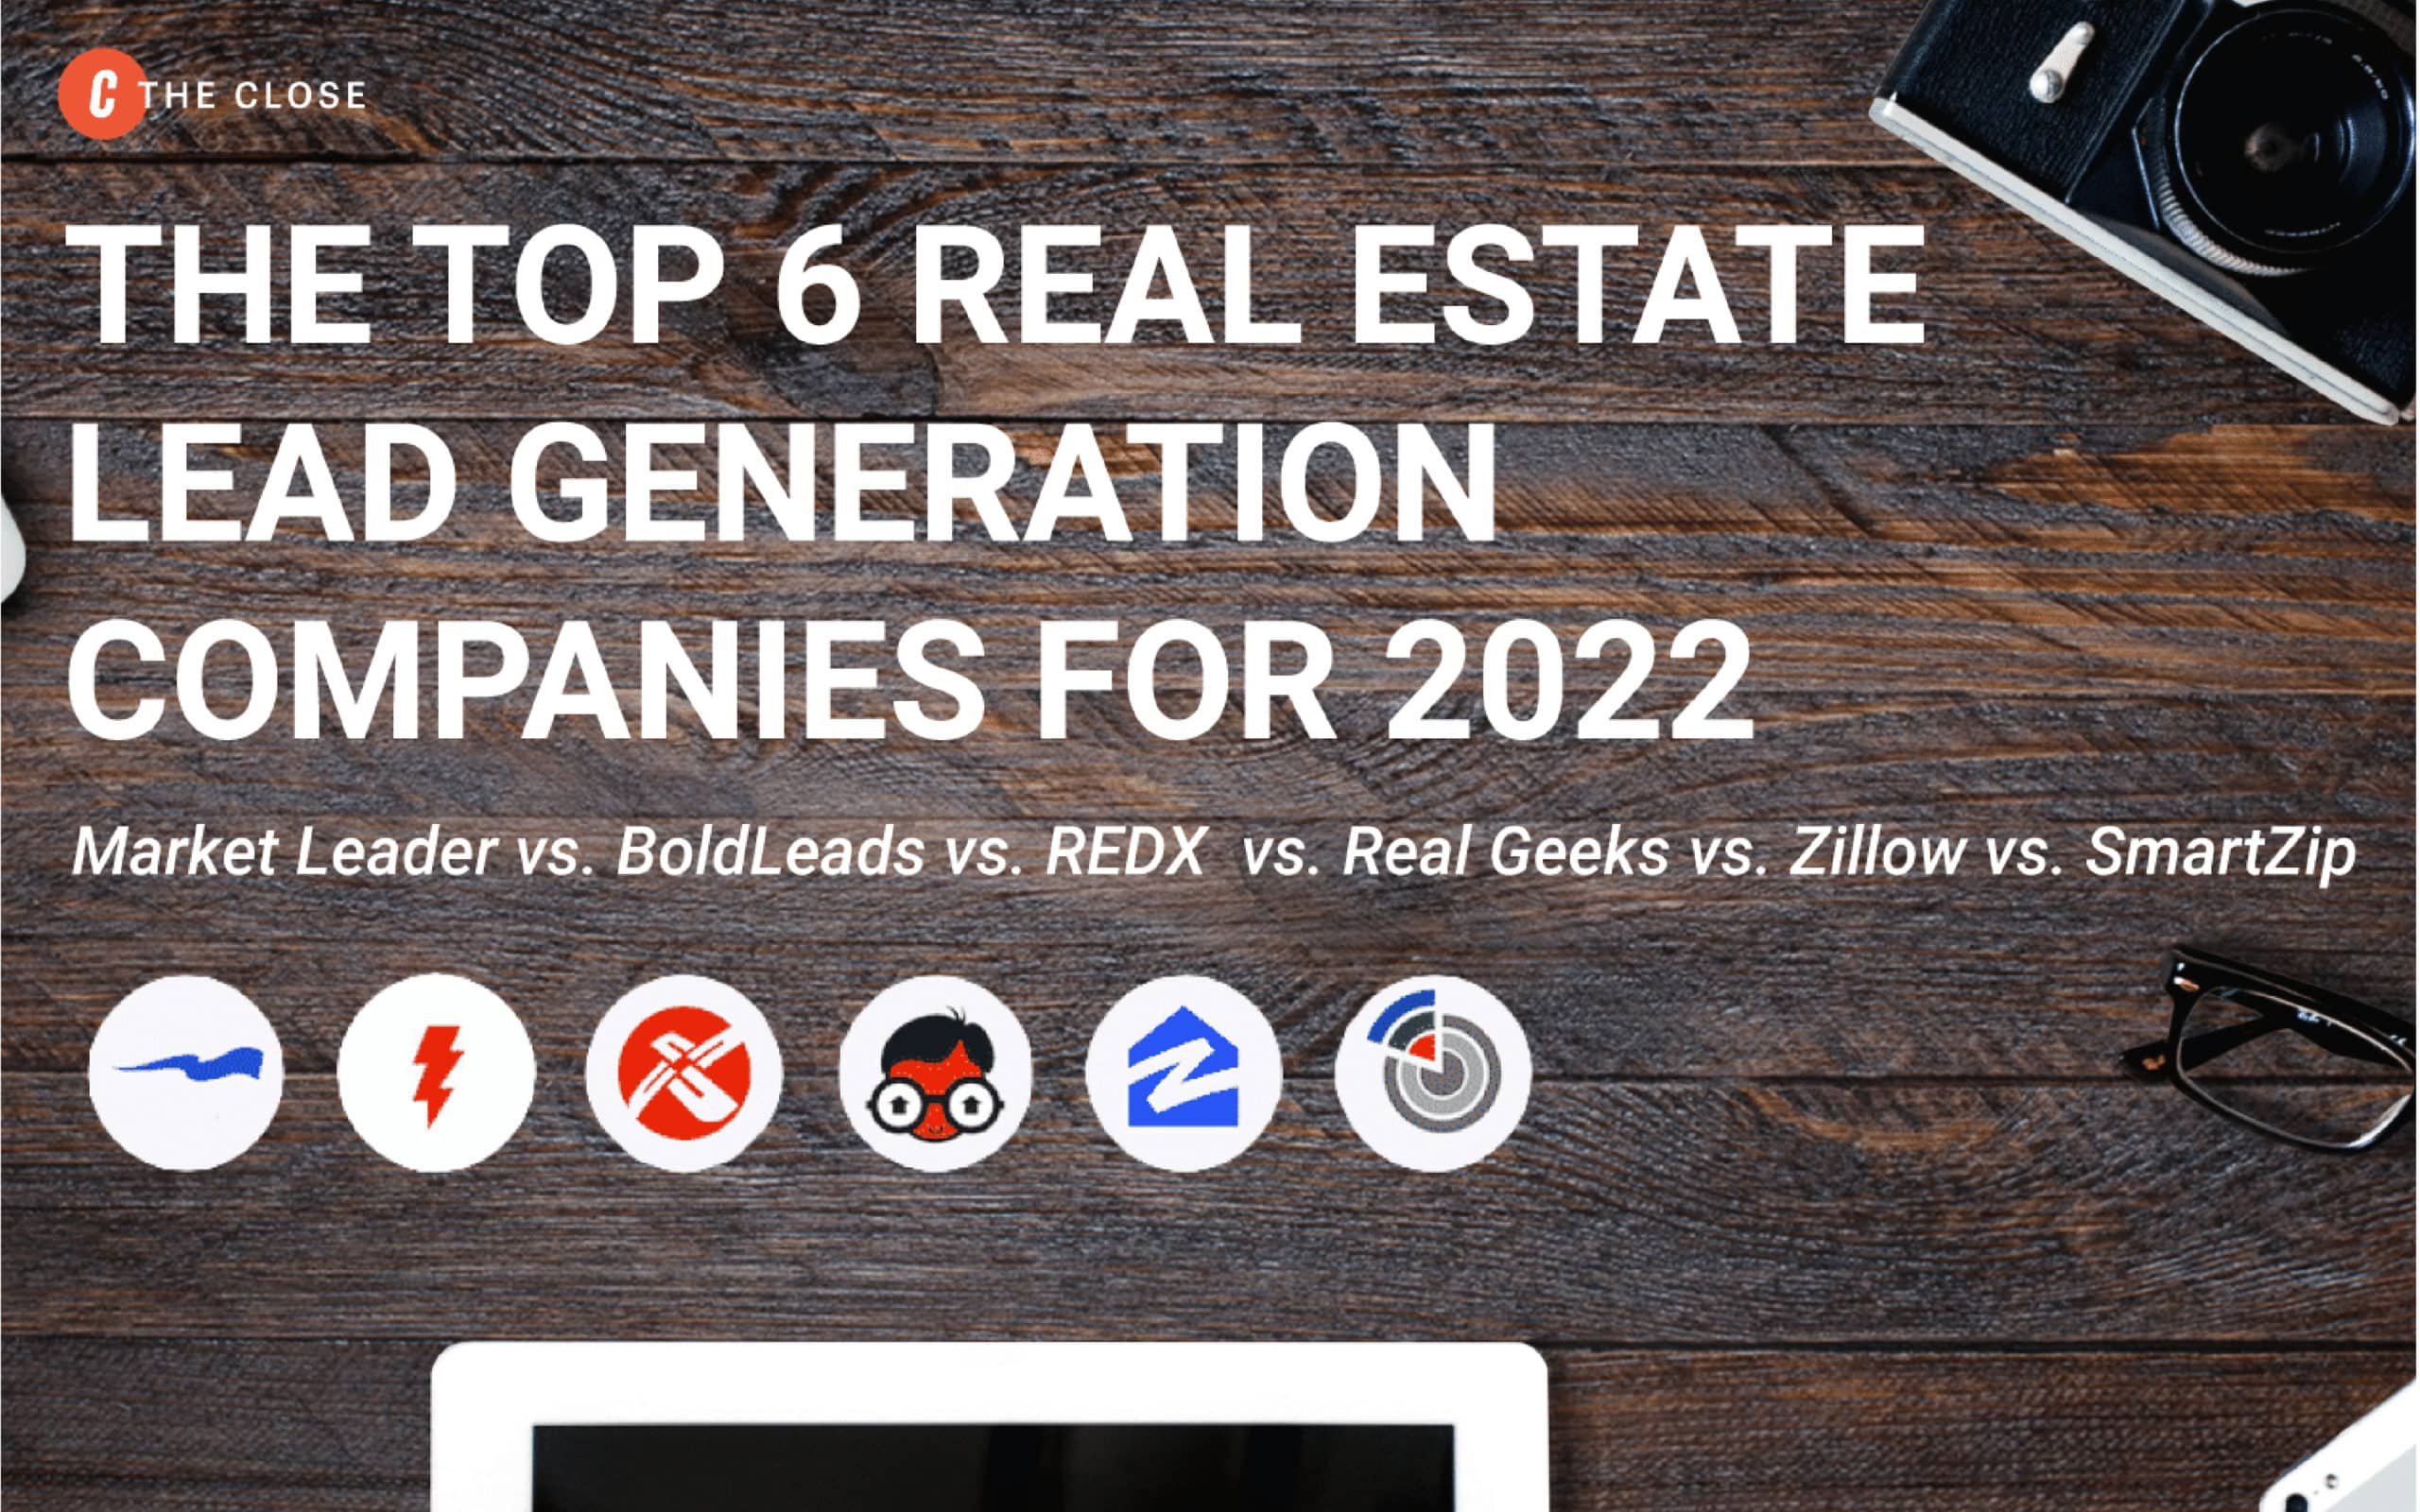 The Top 6 Real Estate Lead Generation Companies for 2022